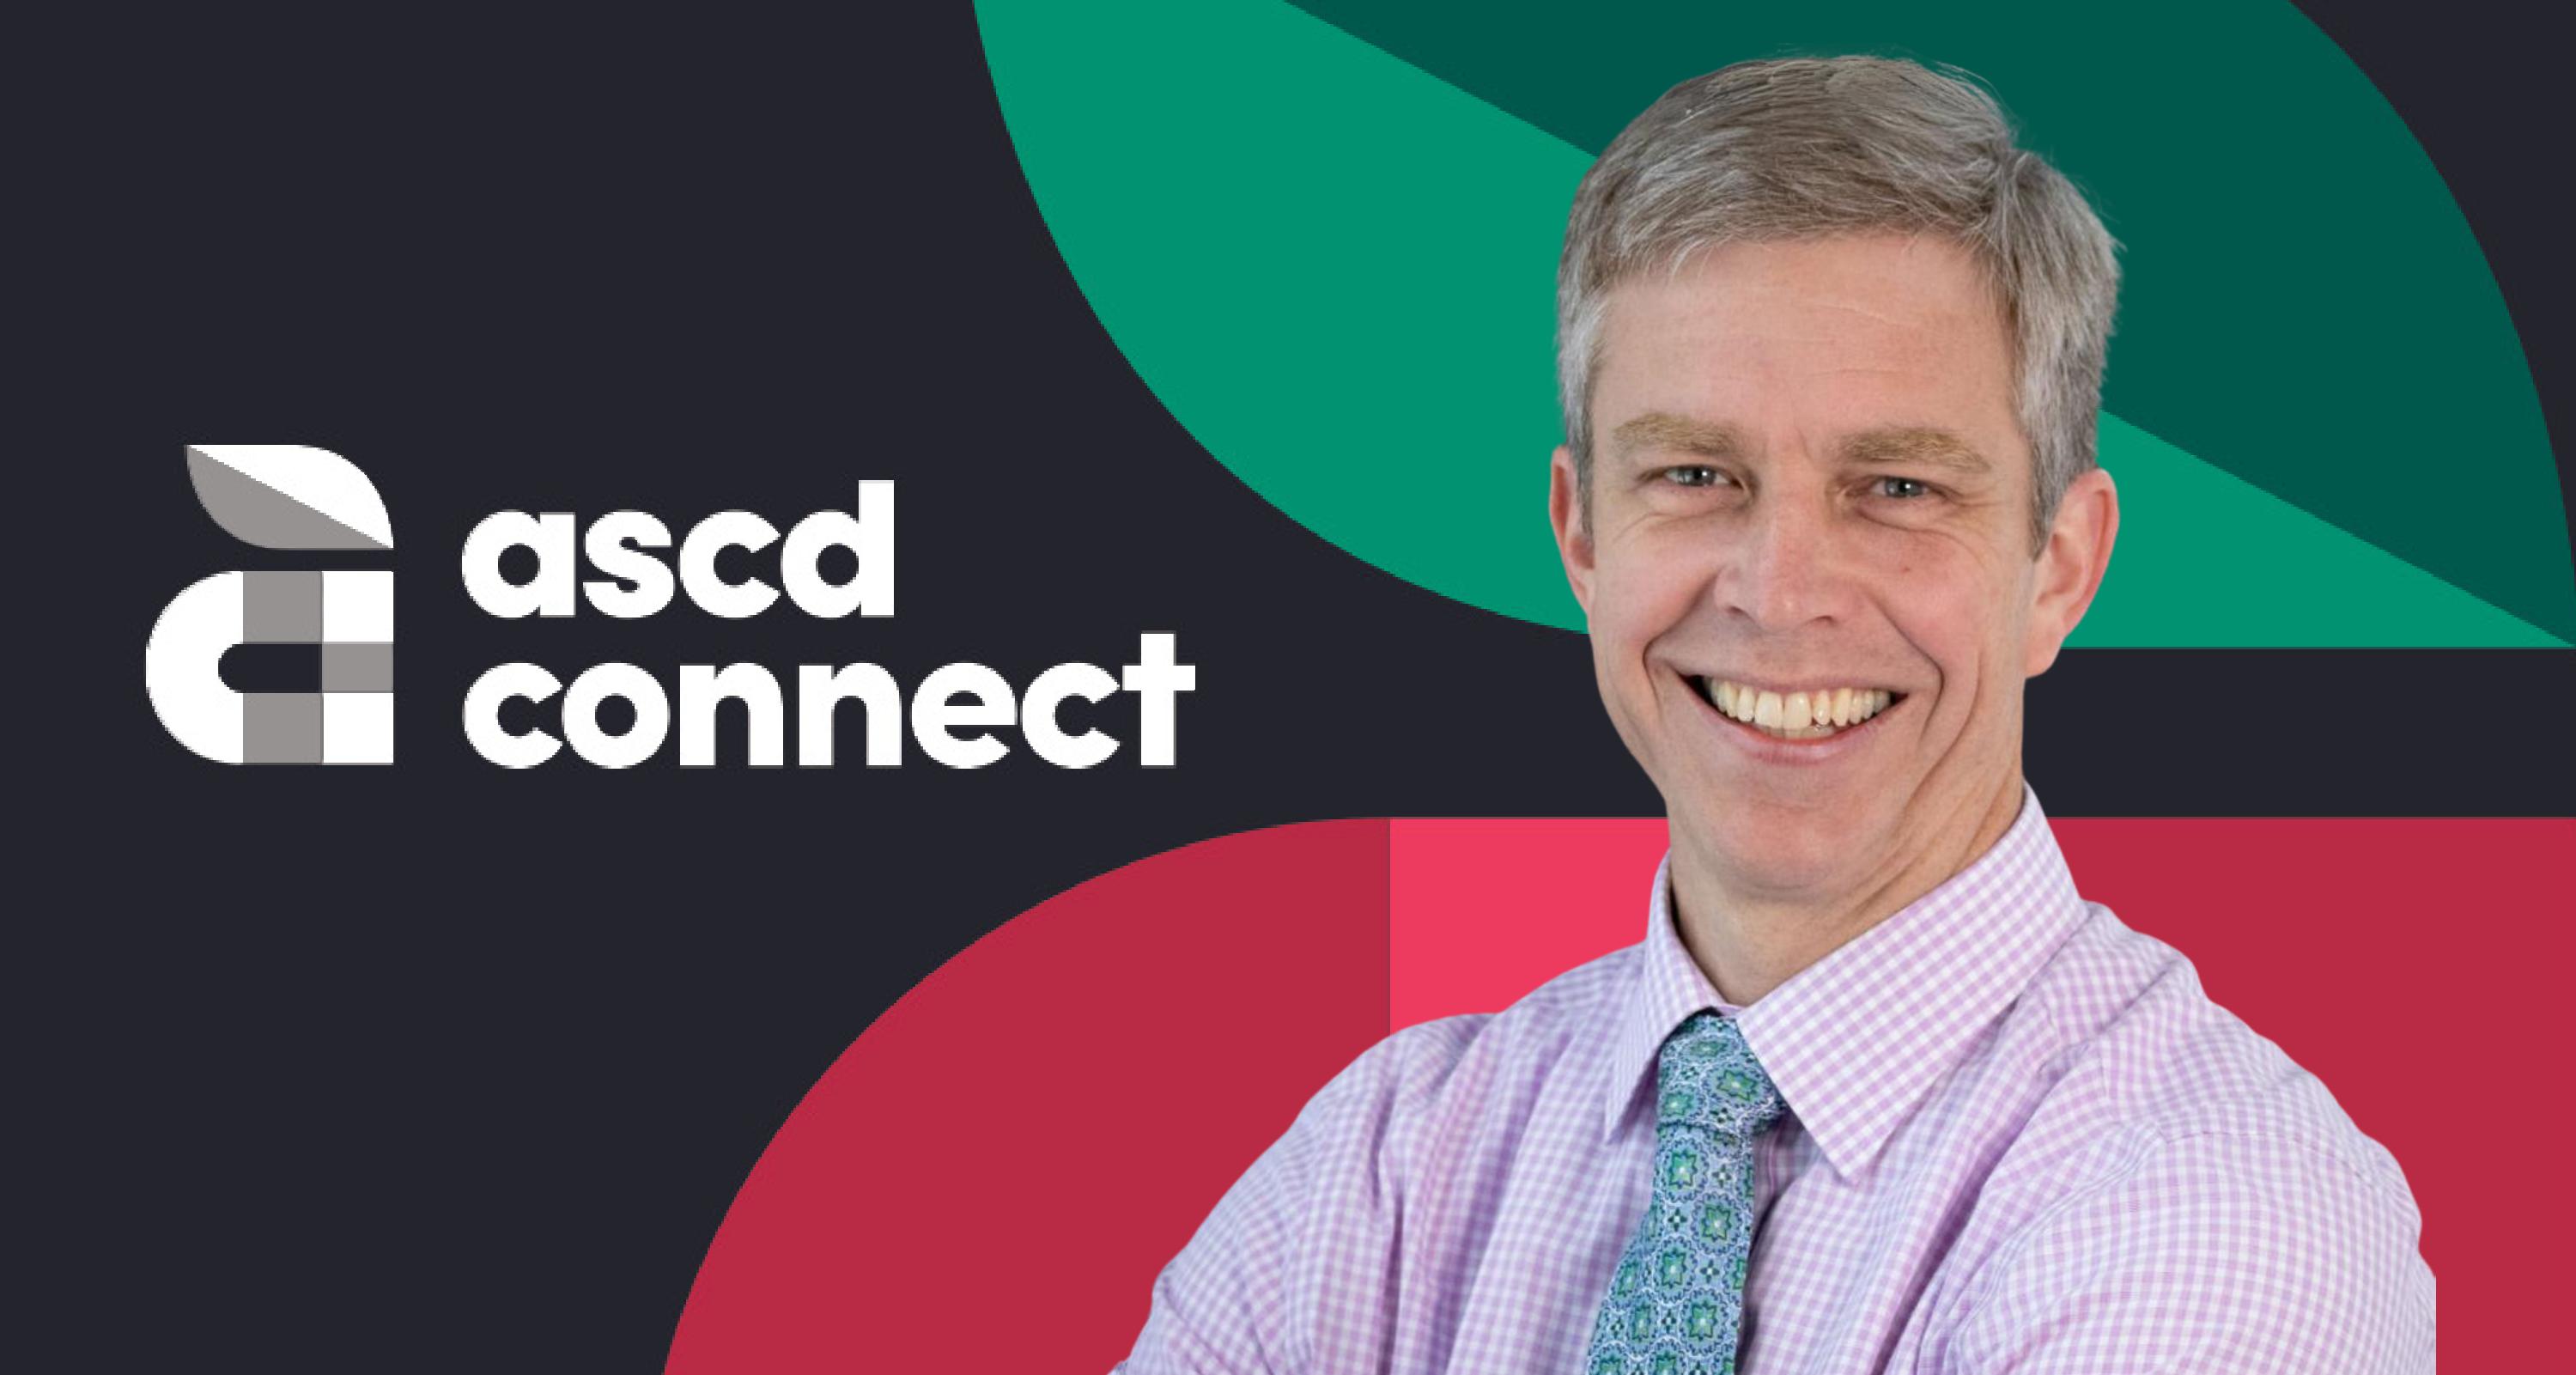 Portrait of Mike Anderson in front of ASCD apple logo with text that says "ascd connect" podcast